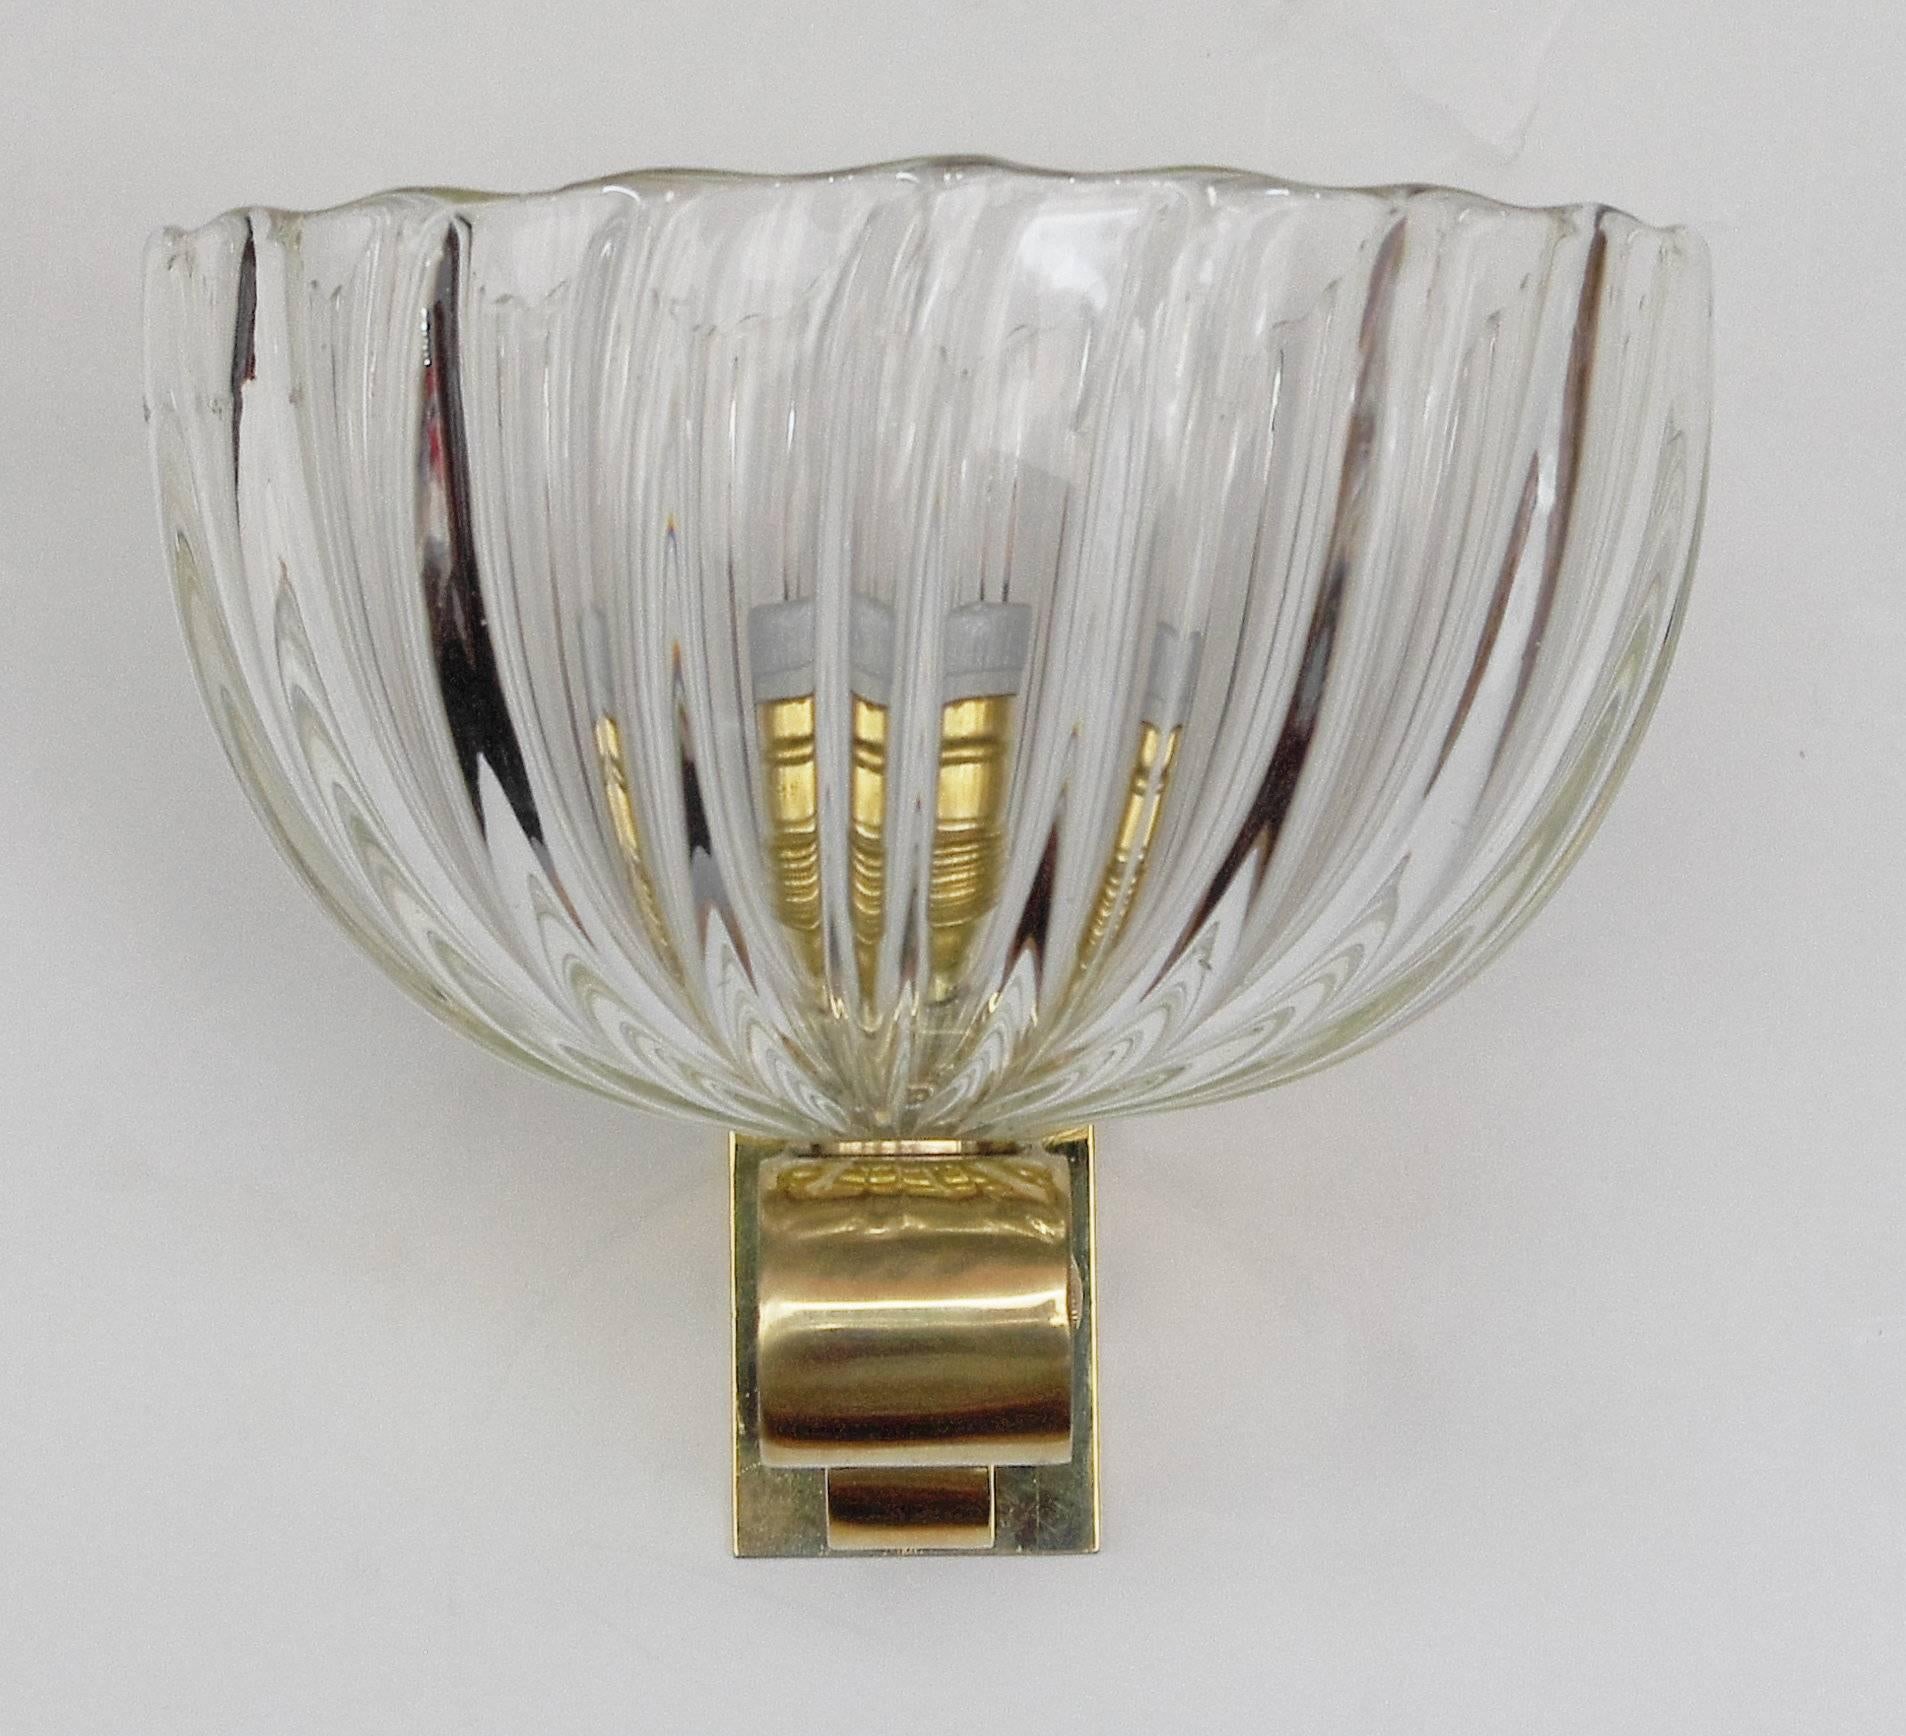 Vintage Italian wall light with clear ribbed Murano glass mounted on brass bracket / Designed by Barovier e Toso, circa 1960’s / Made in Italy
Height: 6 inches / Width: 7.5 inches / Depth: 8.5 inches 
1 light / E26 or E27 type / max 60W
6 in stock